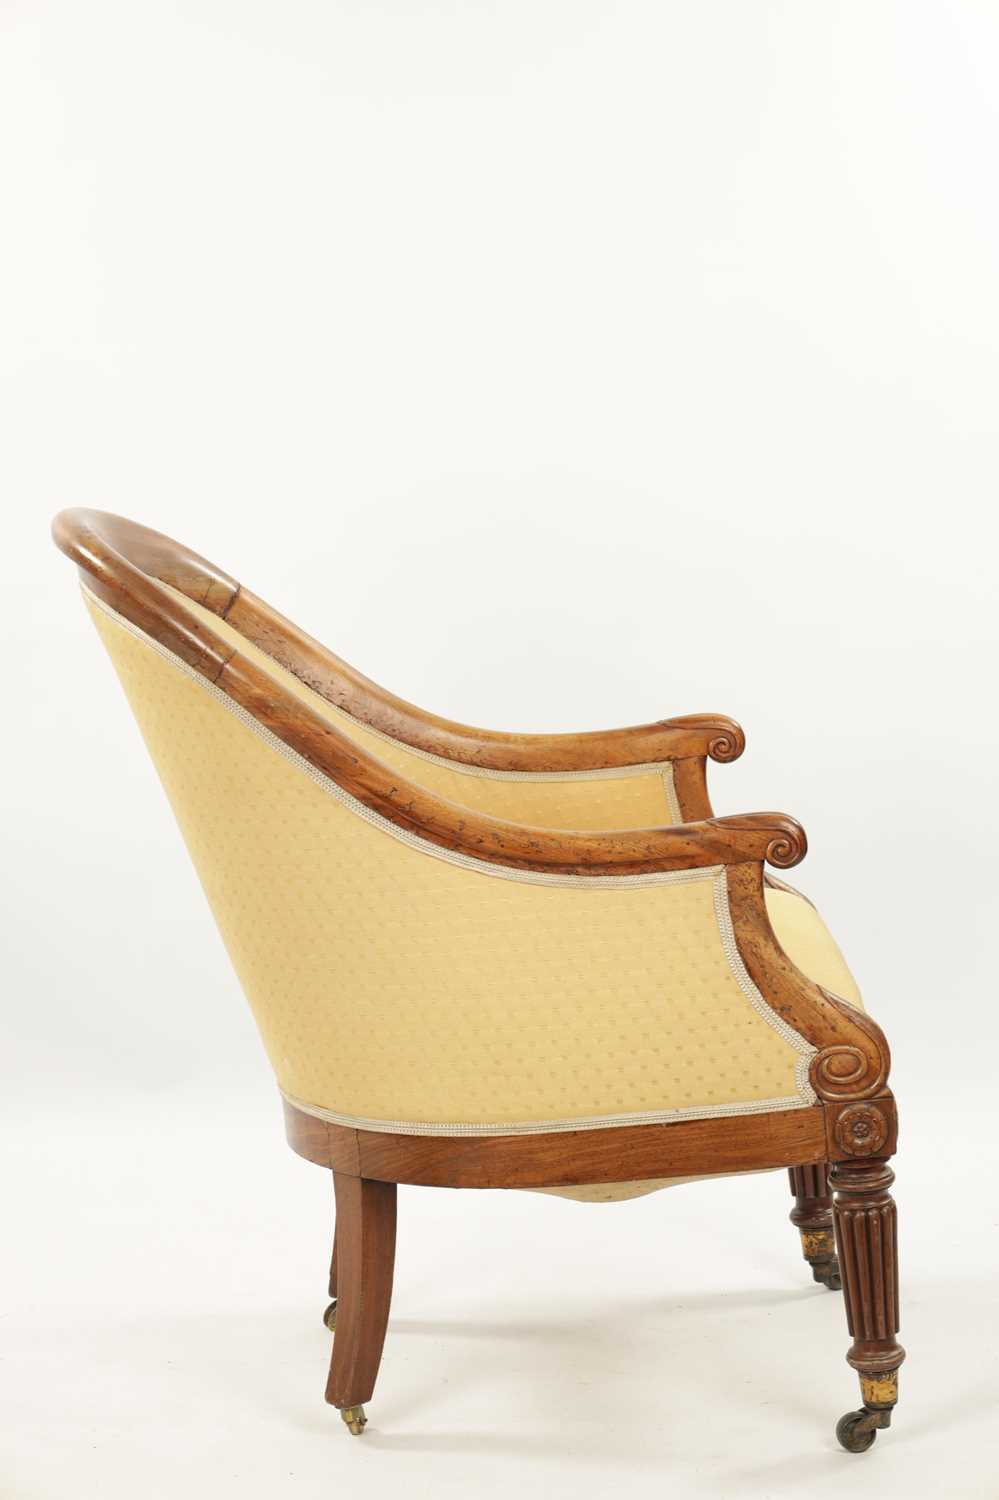 A REGENCY MAHOGANY LIBRARY TUB CHAIR IN THE MANNER OF GILLOWS - Image 9 of 13